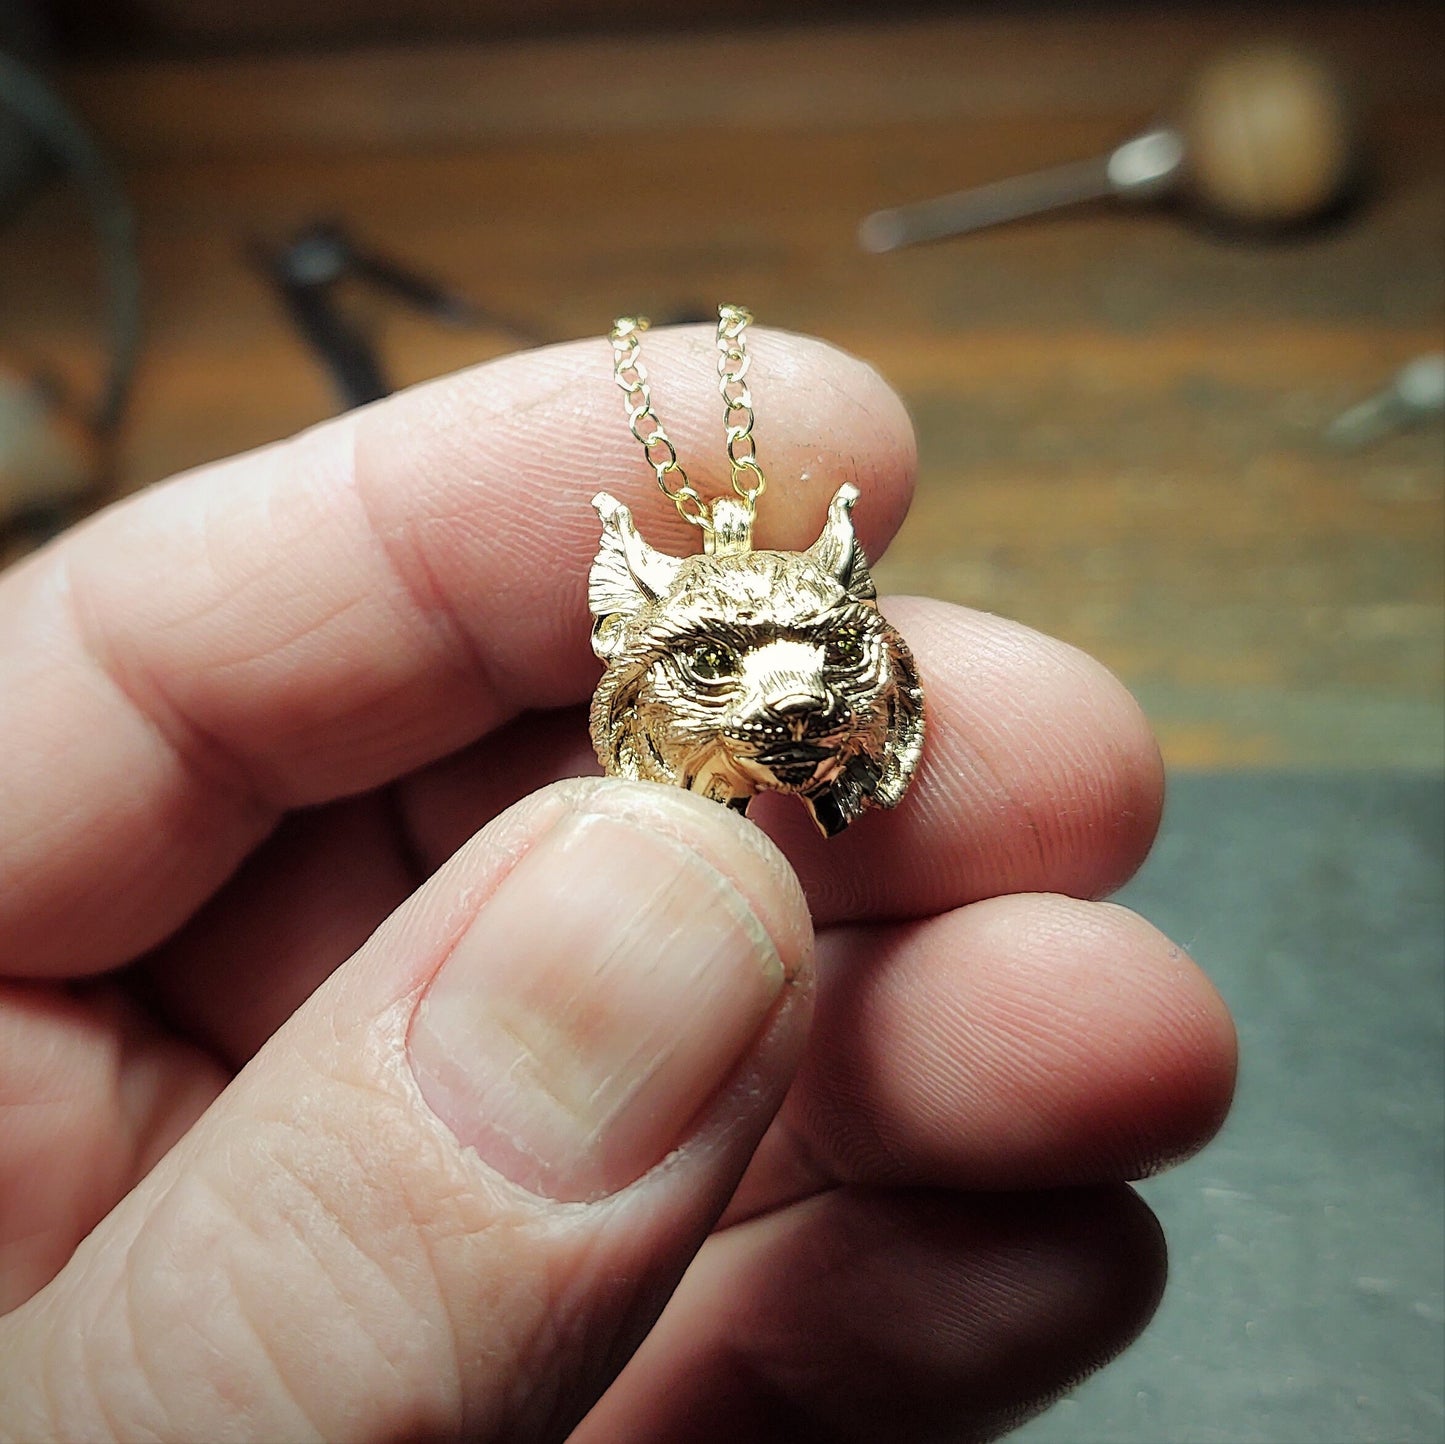 Gold lynx head pendant with diamond eyes and a gold chain. Hand made to order. © Adrian Ashley